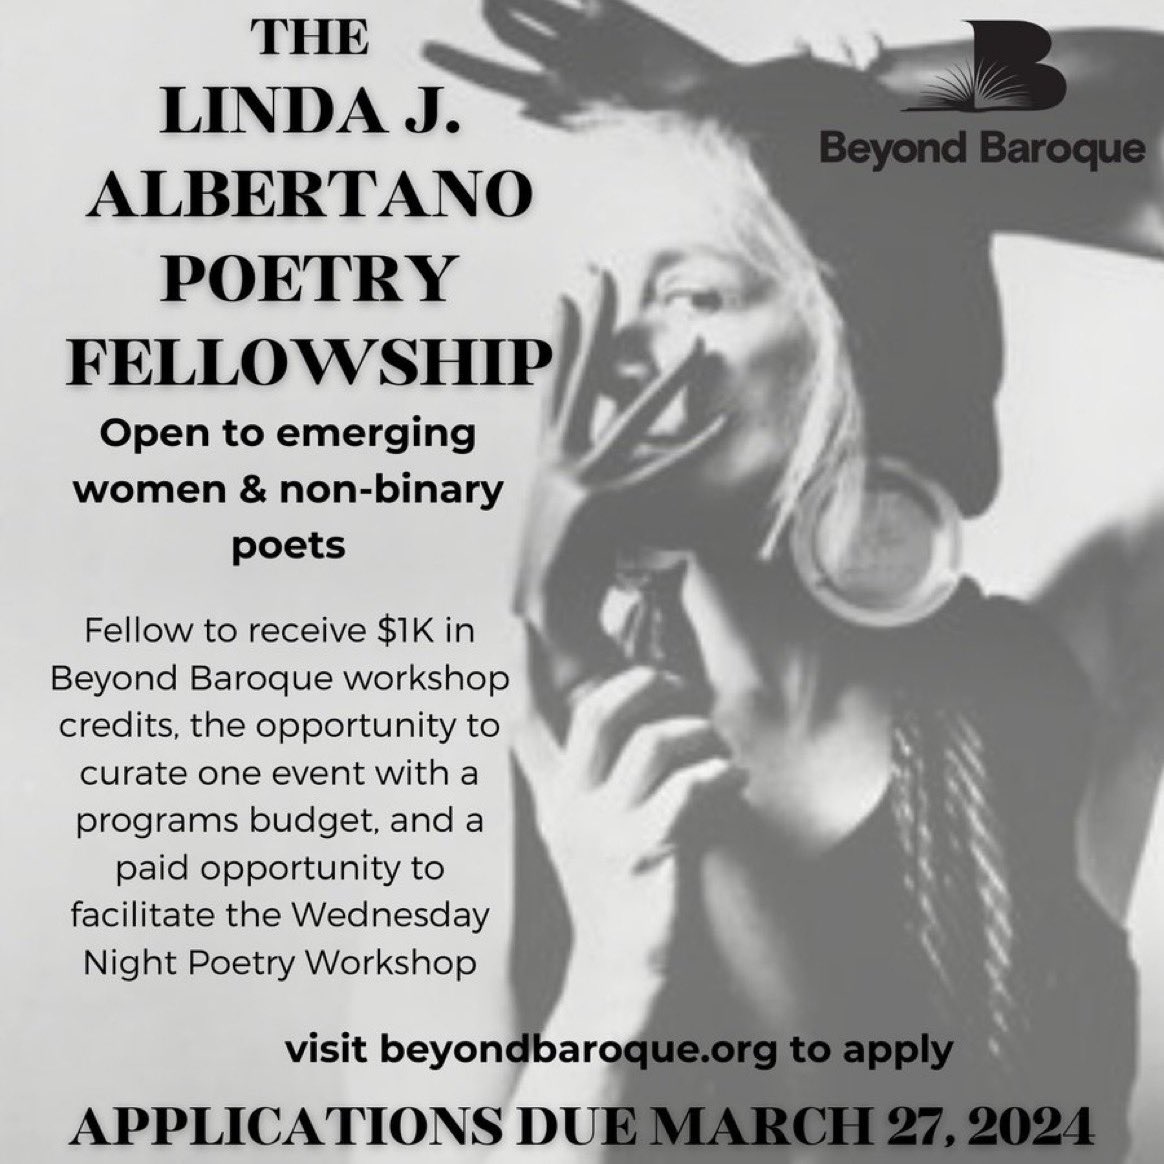 🚨There is just 1️⃣ day left to apply for Beyond Baroque’s Linda J. Albertano Poetry Fellowship. 💫 This is an amazing opportunity for emerging women and non-binary poets in the greater Los Angeles area. 💌 Apply by March 27! ⬇️ Please share! beyondbaroque.org/lindaalbertano… #poetry